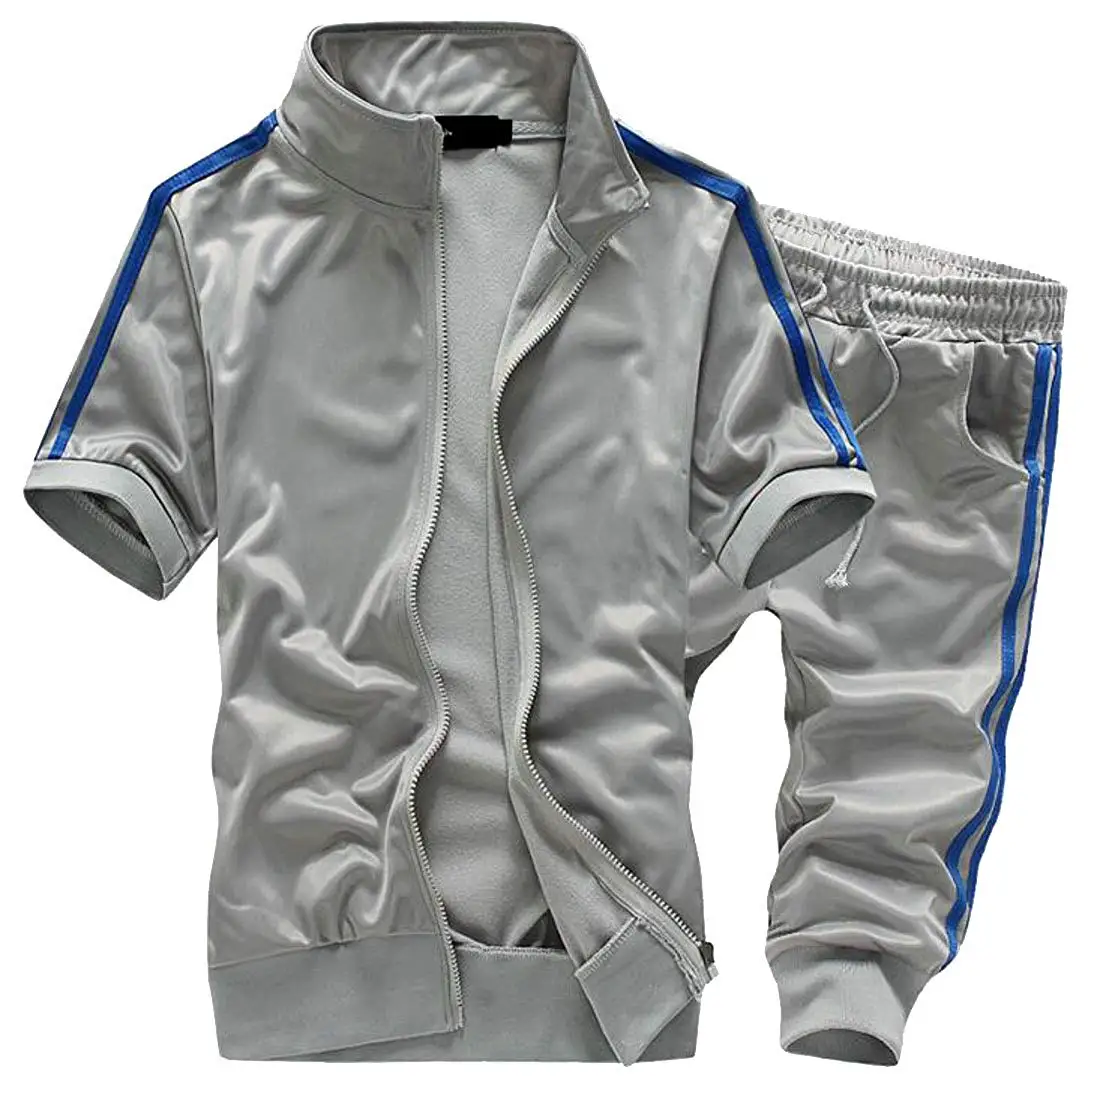 Cheap Replica Tracksuits, find Replica Tracksuits deals on line at ...